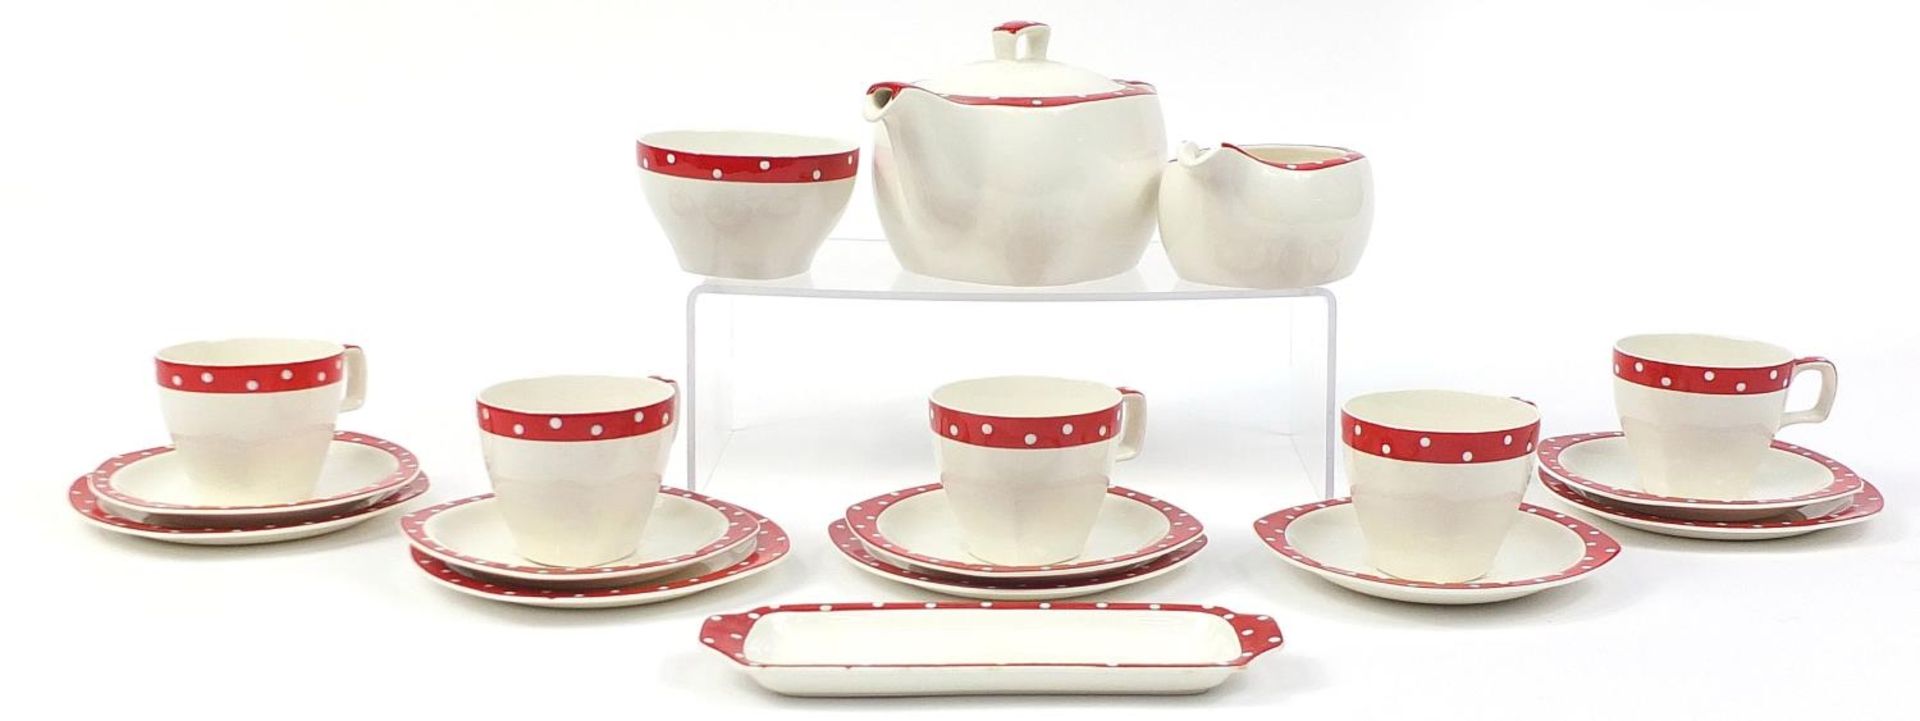 Midwinter Stylecraft polka dot teaware including teapot and cups with saucers, the largest 22cm in